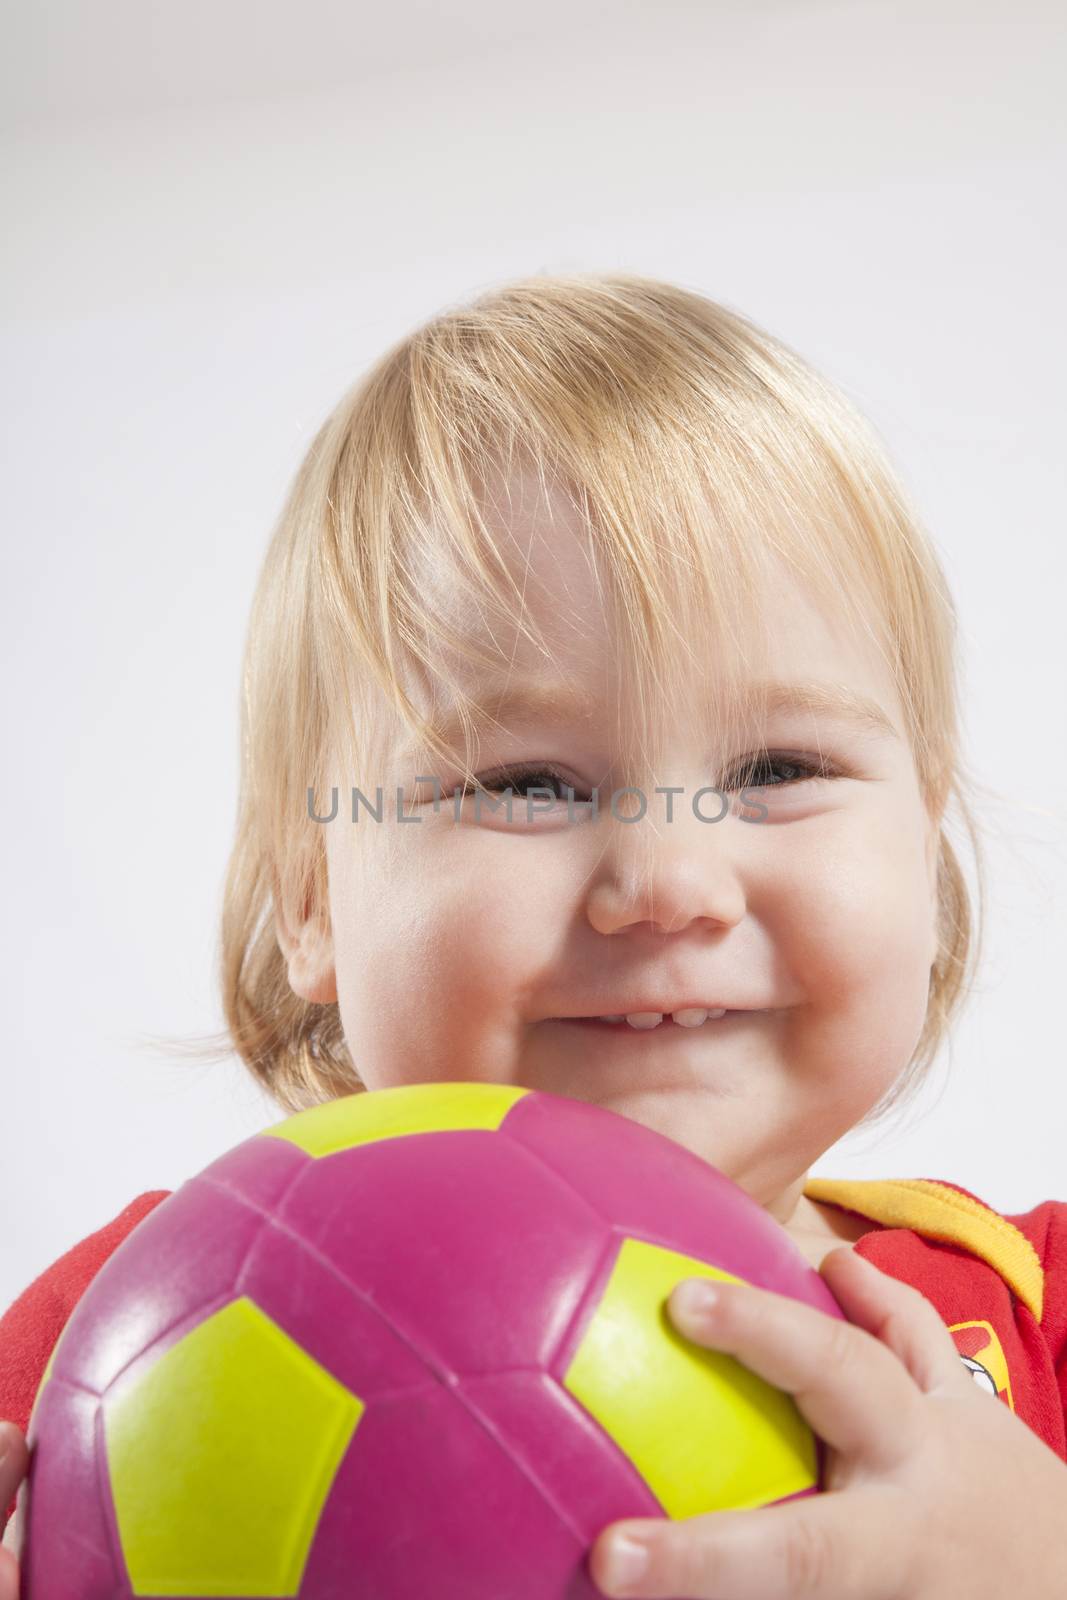 smiling lovely face blonde baby sixteen month old with red shirt of Spanish soccer team and ball